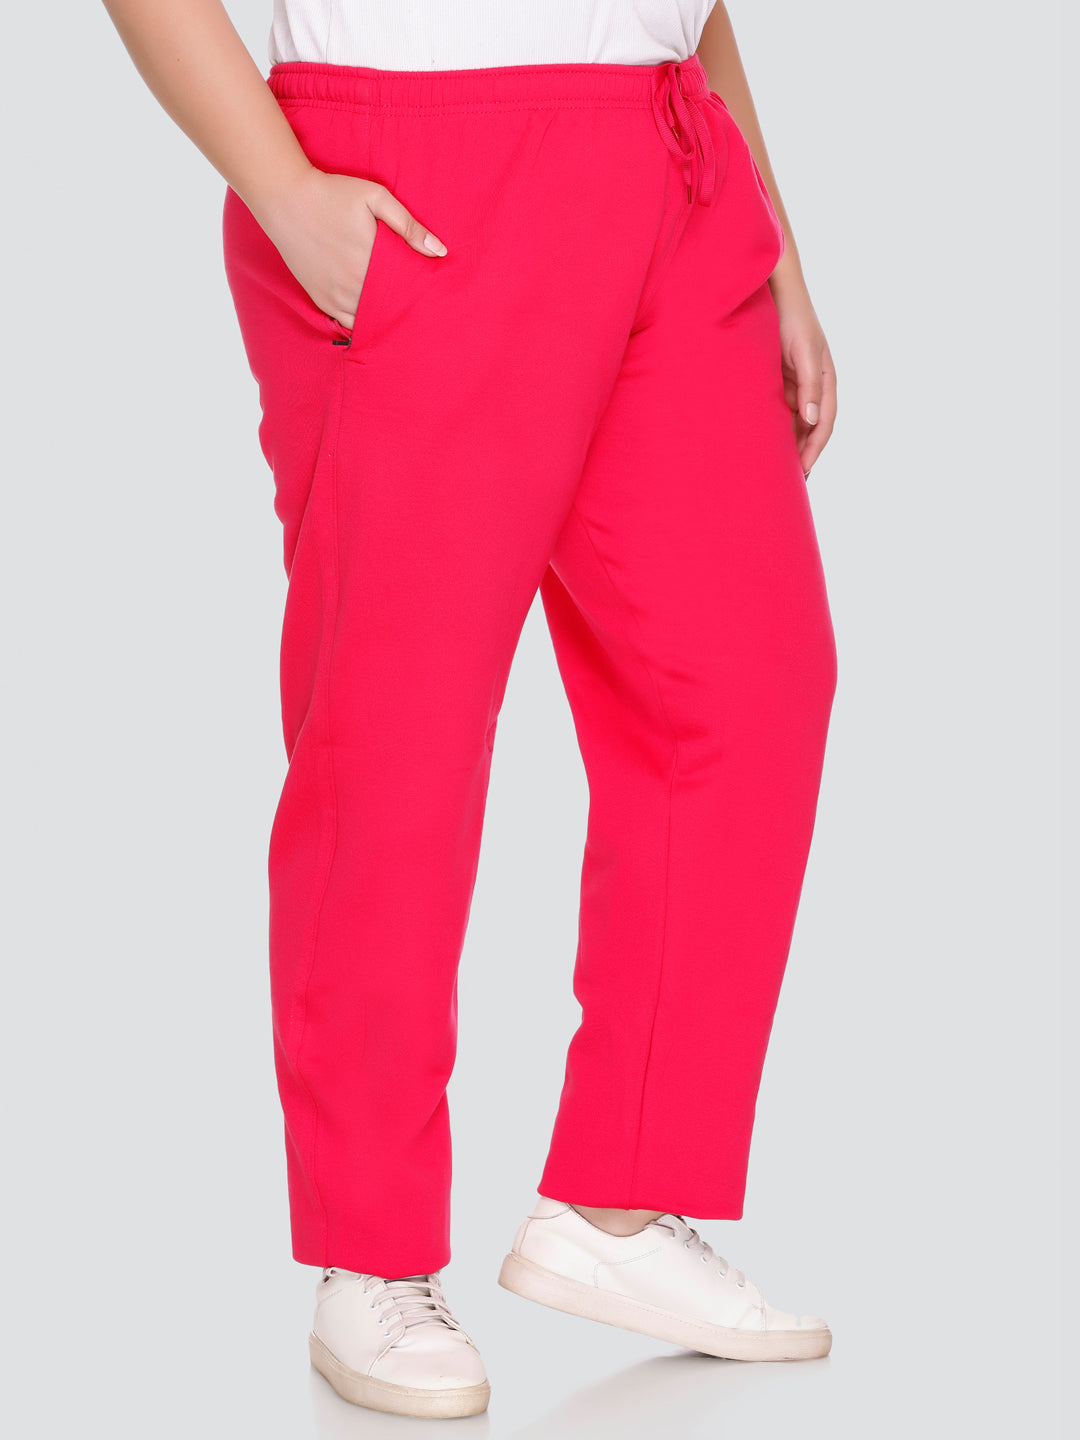 Relaxed-fit Sweatpants Jogger With Pockets, Women's Comfy Sweatpants, Jogging  Pants, Drawstring Waistline, Plus Size Available, Fall -  Canada